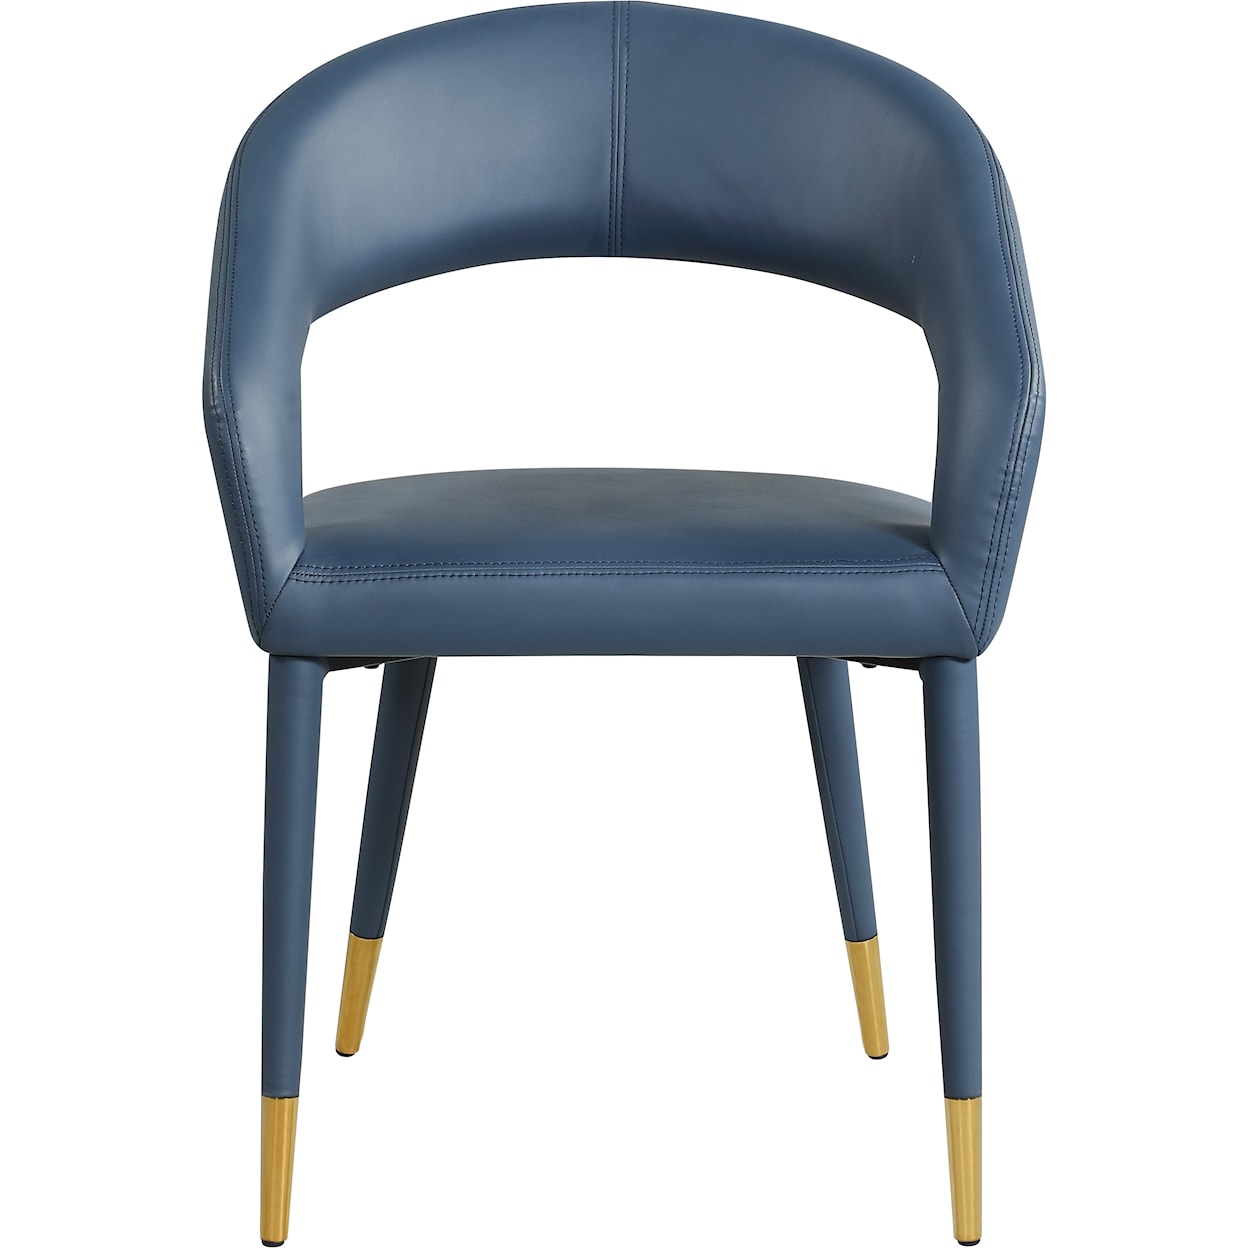 Meridian Furniture Destiny Upholstered Navy Faux Leather Dining Chair